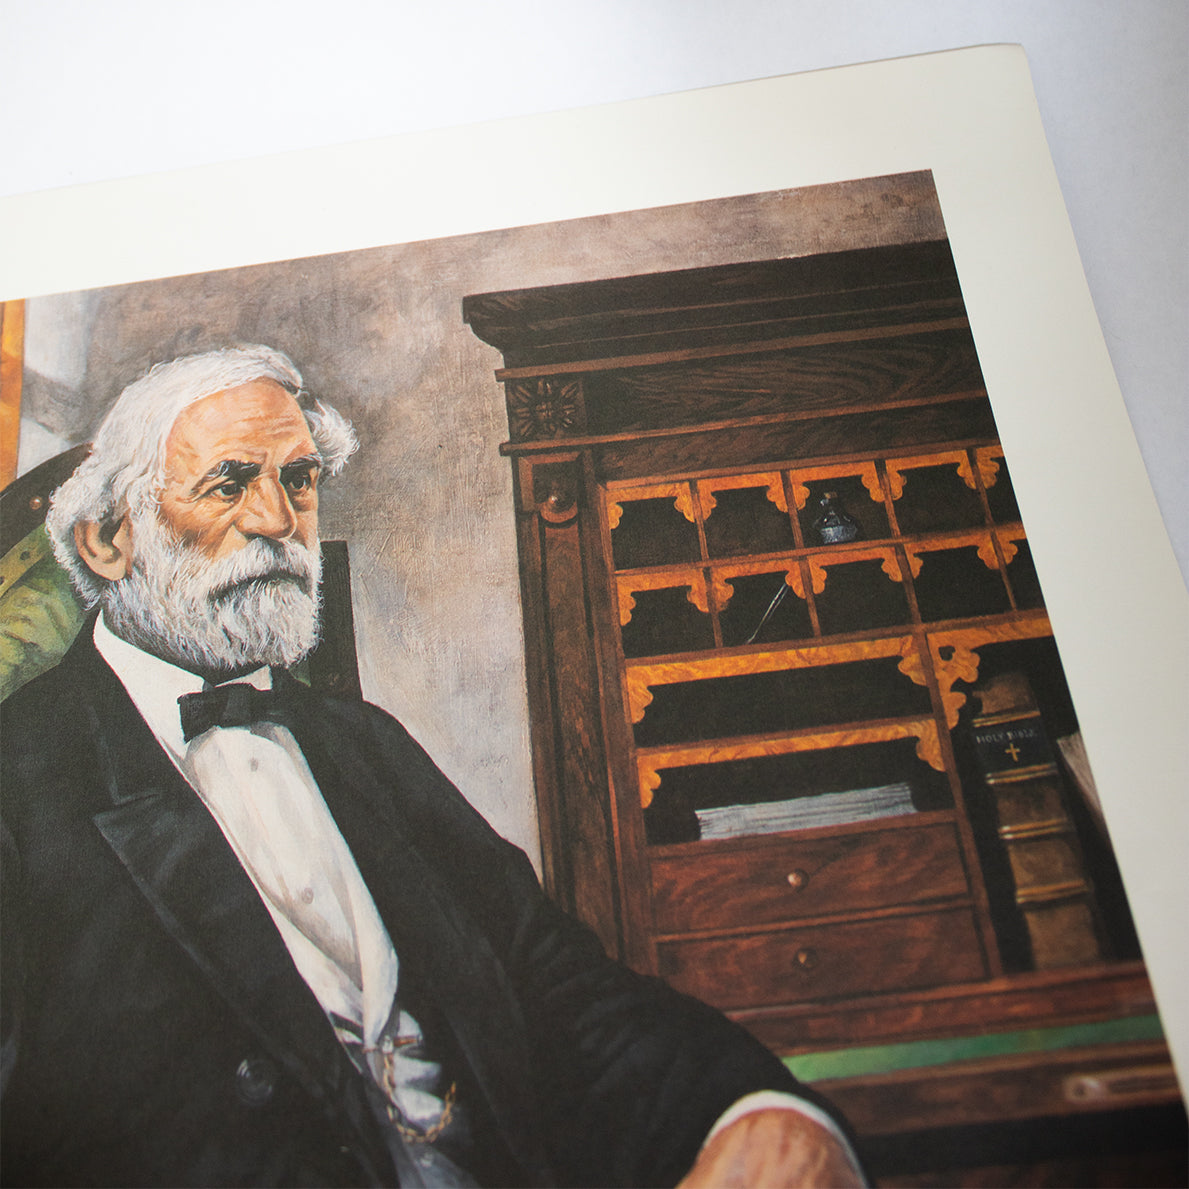 Robert E. Lee Print Signed by Artist, Tom Gallo - Special KA Edition